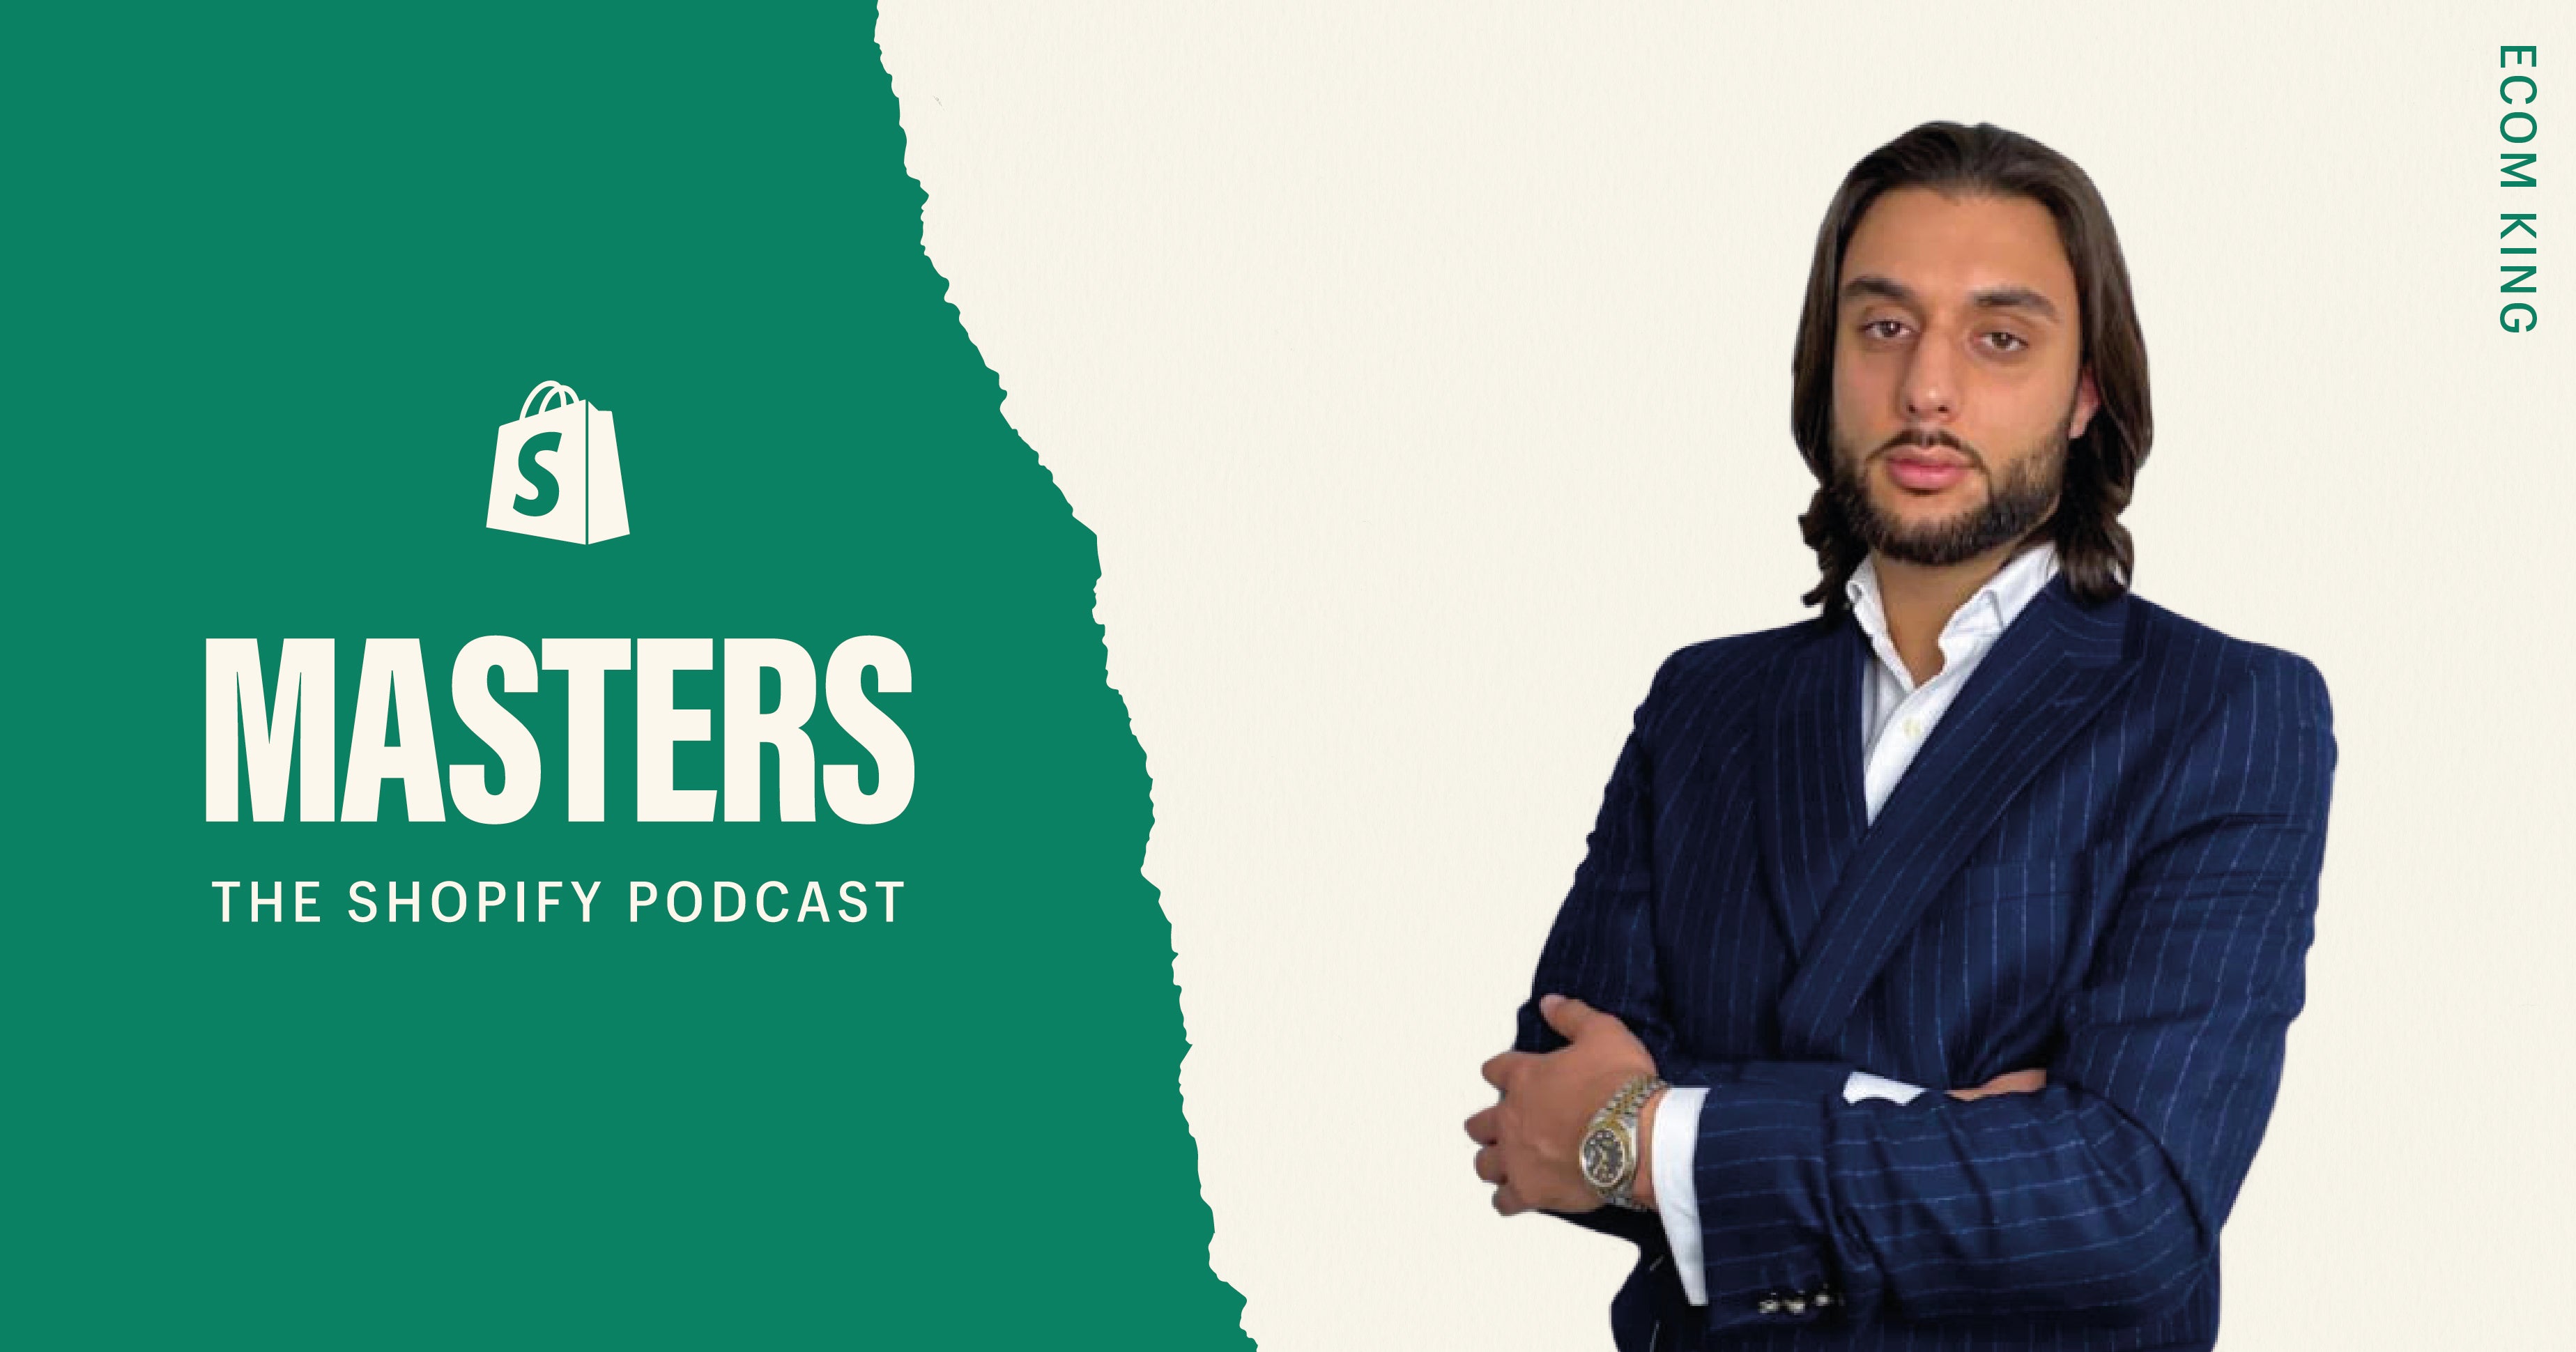 masters the Shopify podcast: Kamil Sattar with arms crossed on right side